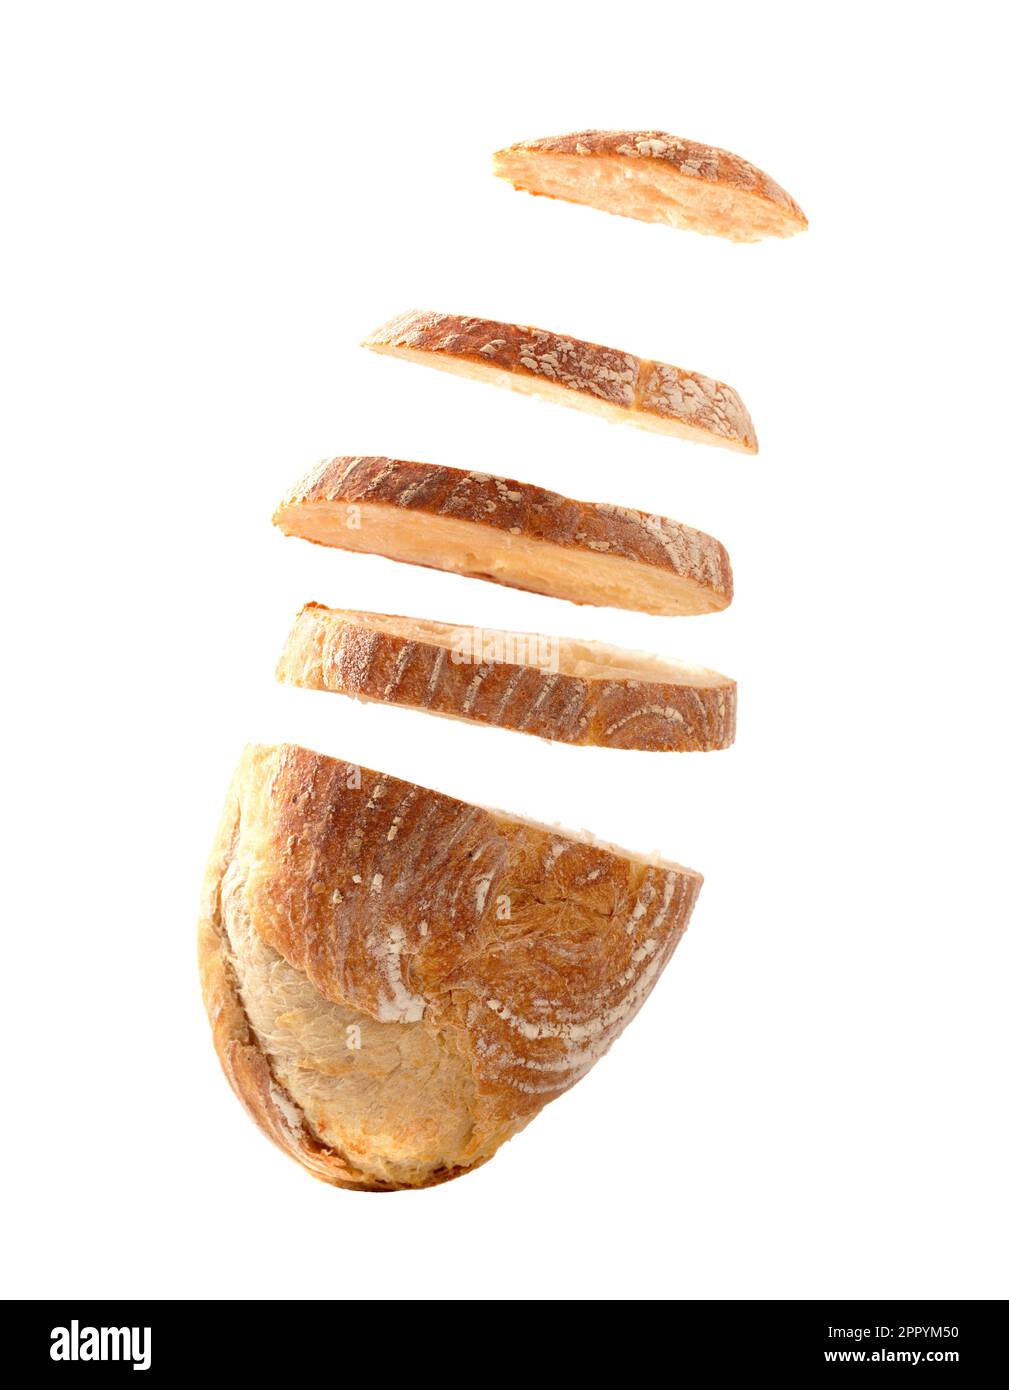 Falling sliced white wheat bread on a white background vertically. Slies of cut bread flying in the air on isolation. Stock Photo